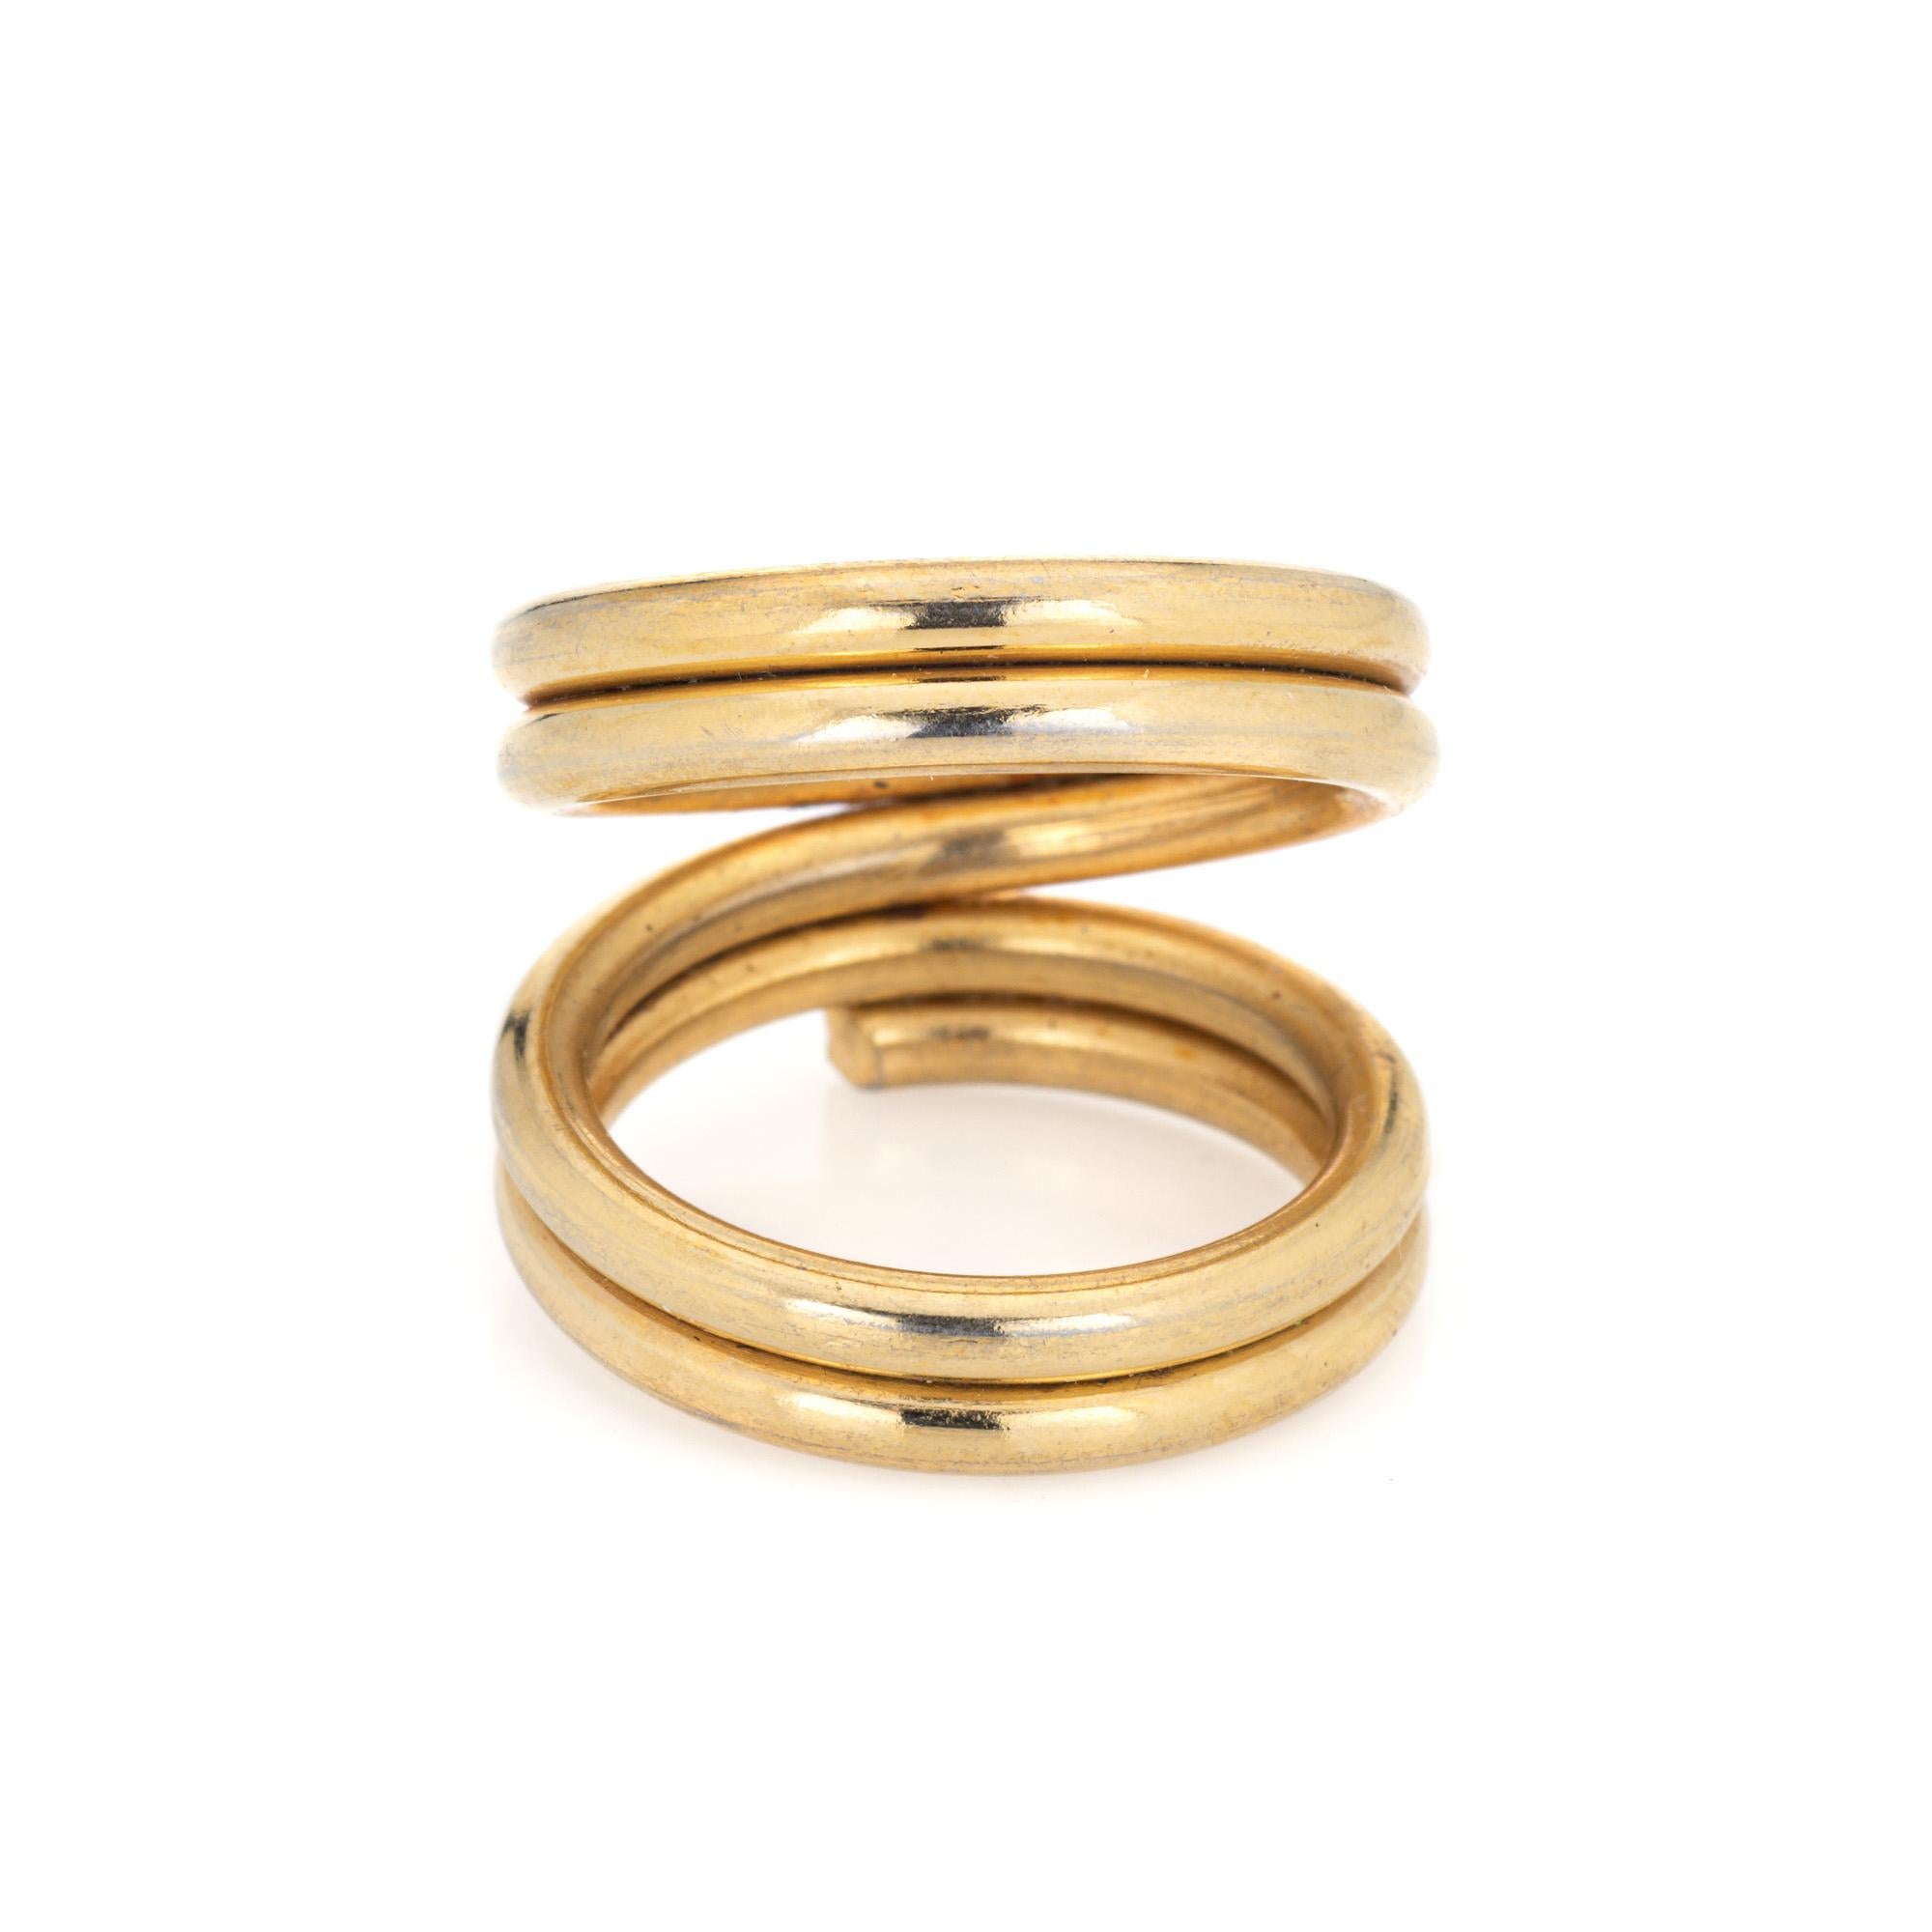 Finely detailed split coil ring crafted in 18 karat yellow gold. 

With a split design the striking ring is great worn alone as a statement piece or stacked for maximum effect. The low rise ring (4mm - 0.15 inches) sits comfortably on the